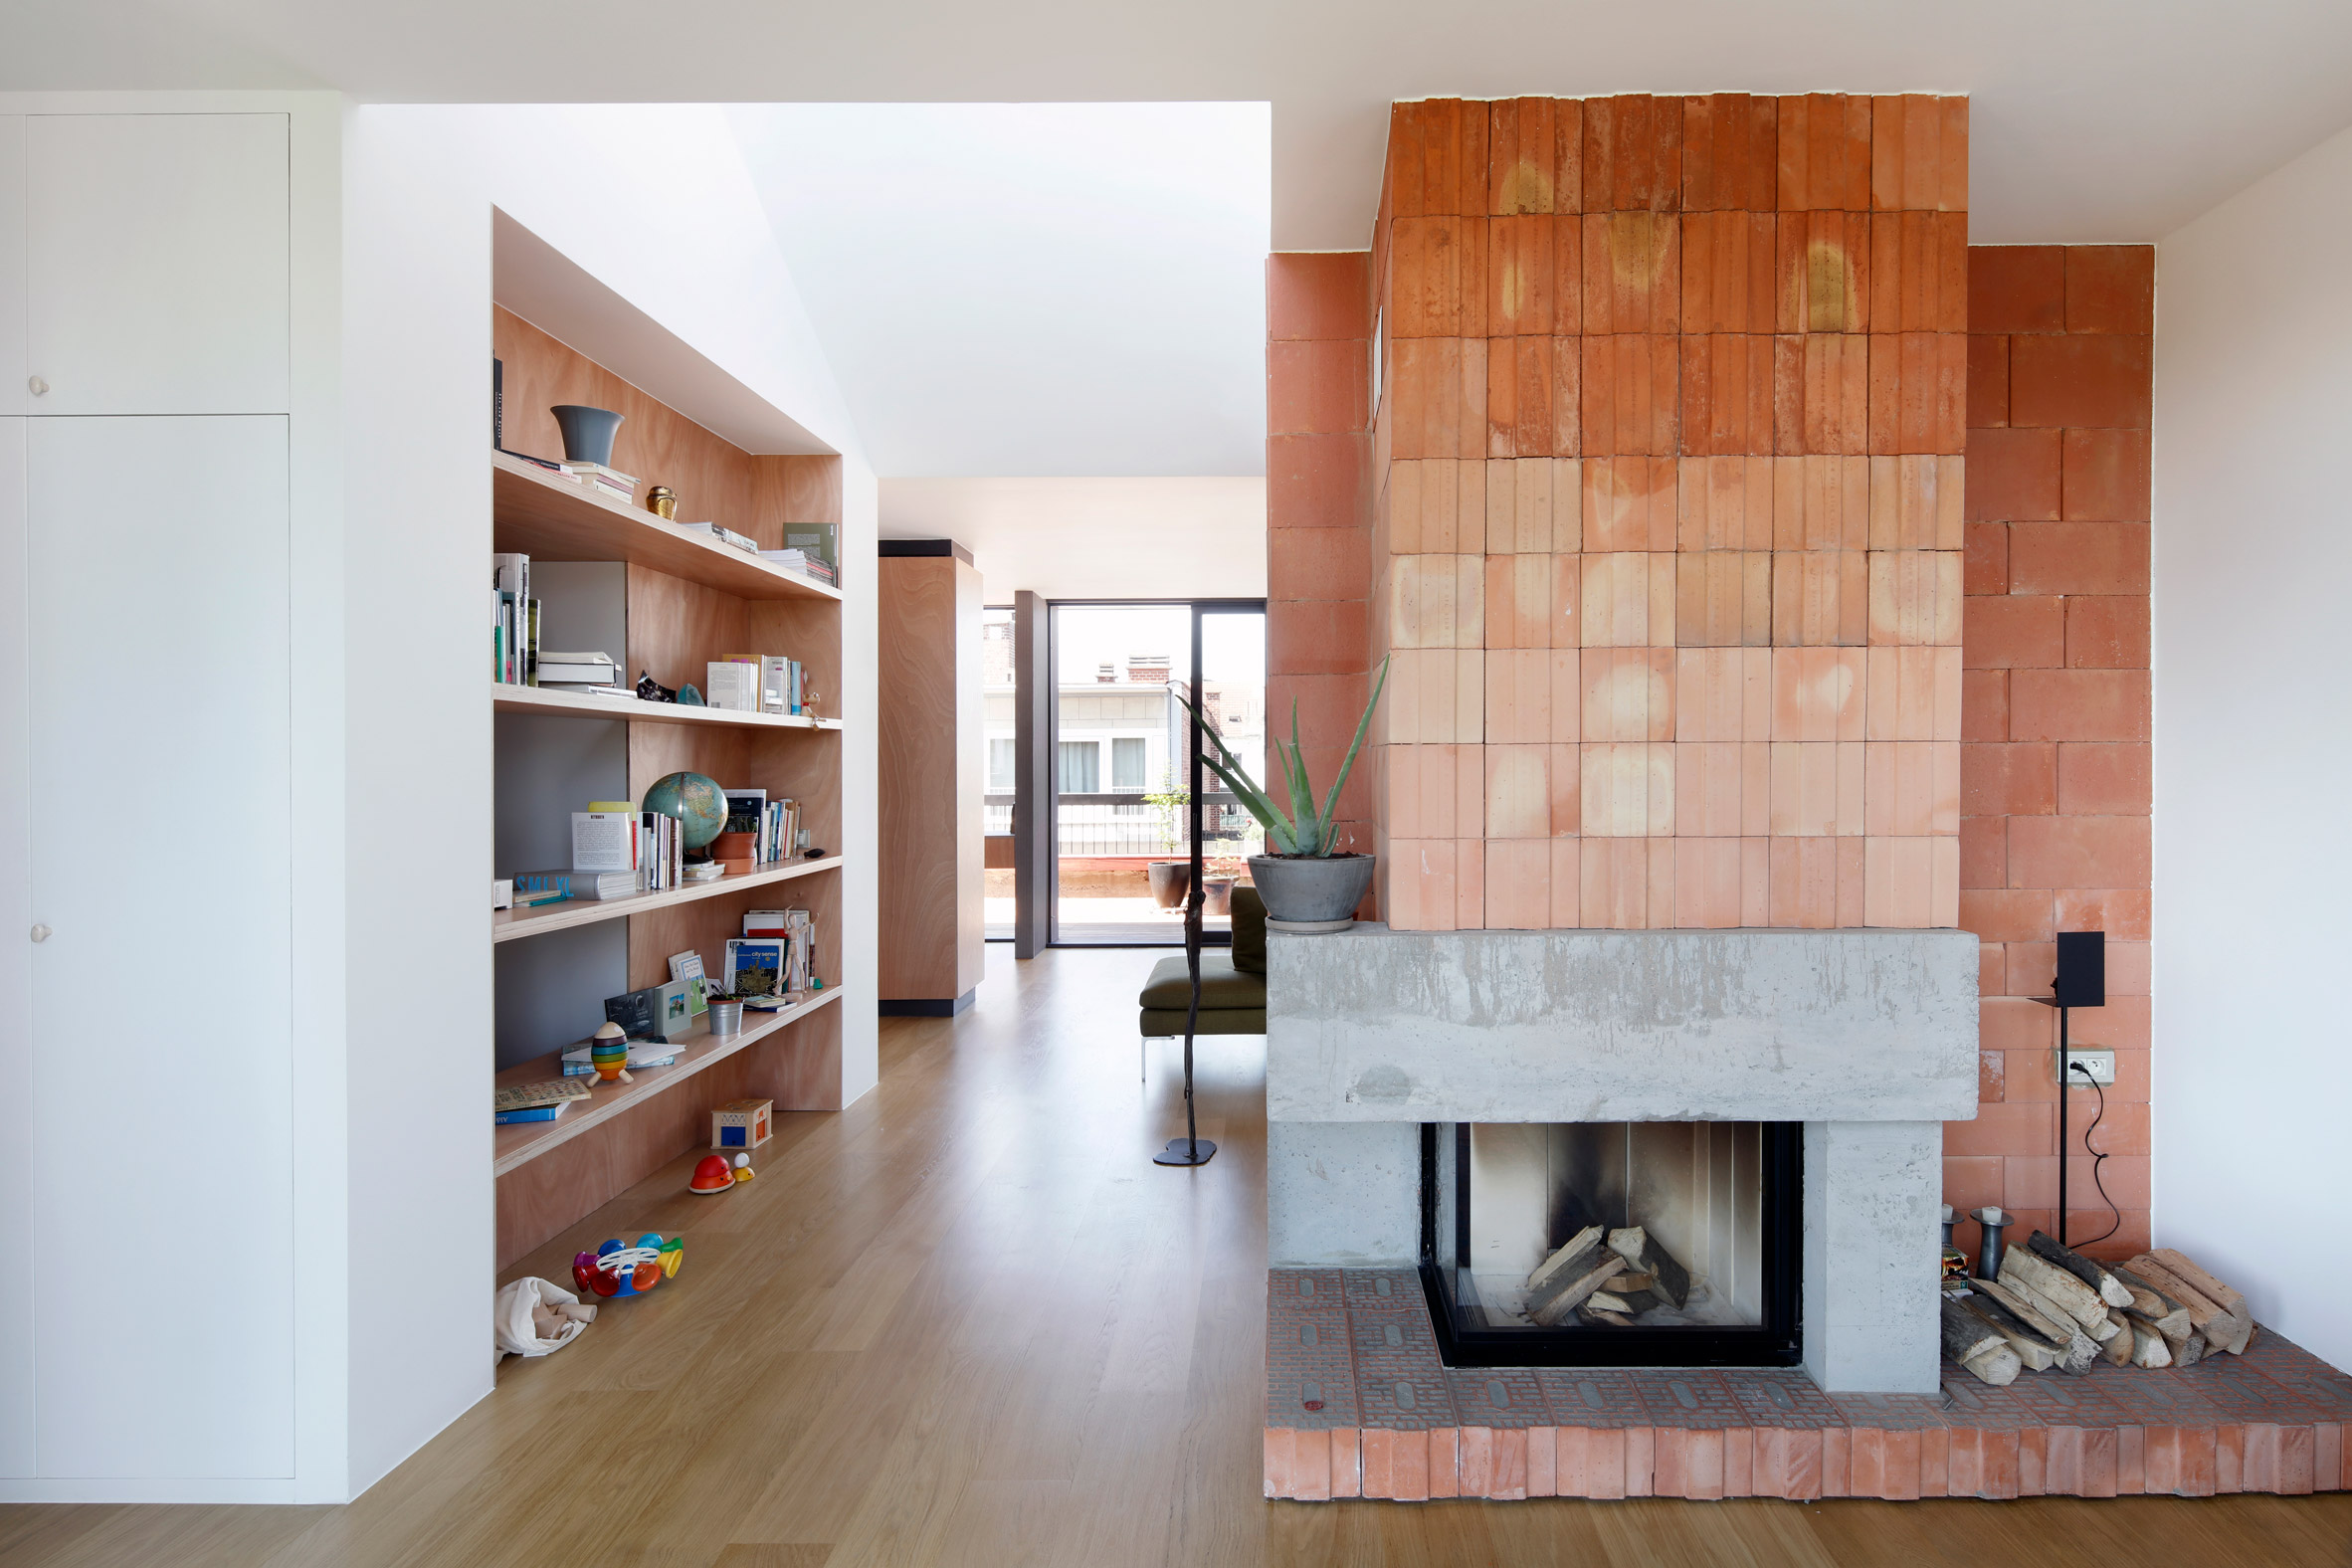 Alvar Aalto inspired the orange fireplace in this Brussels roof 